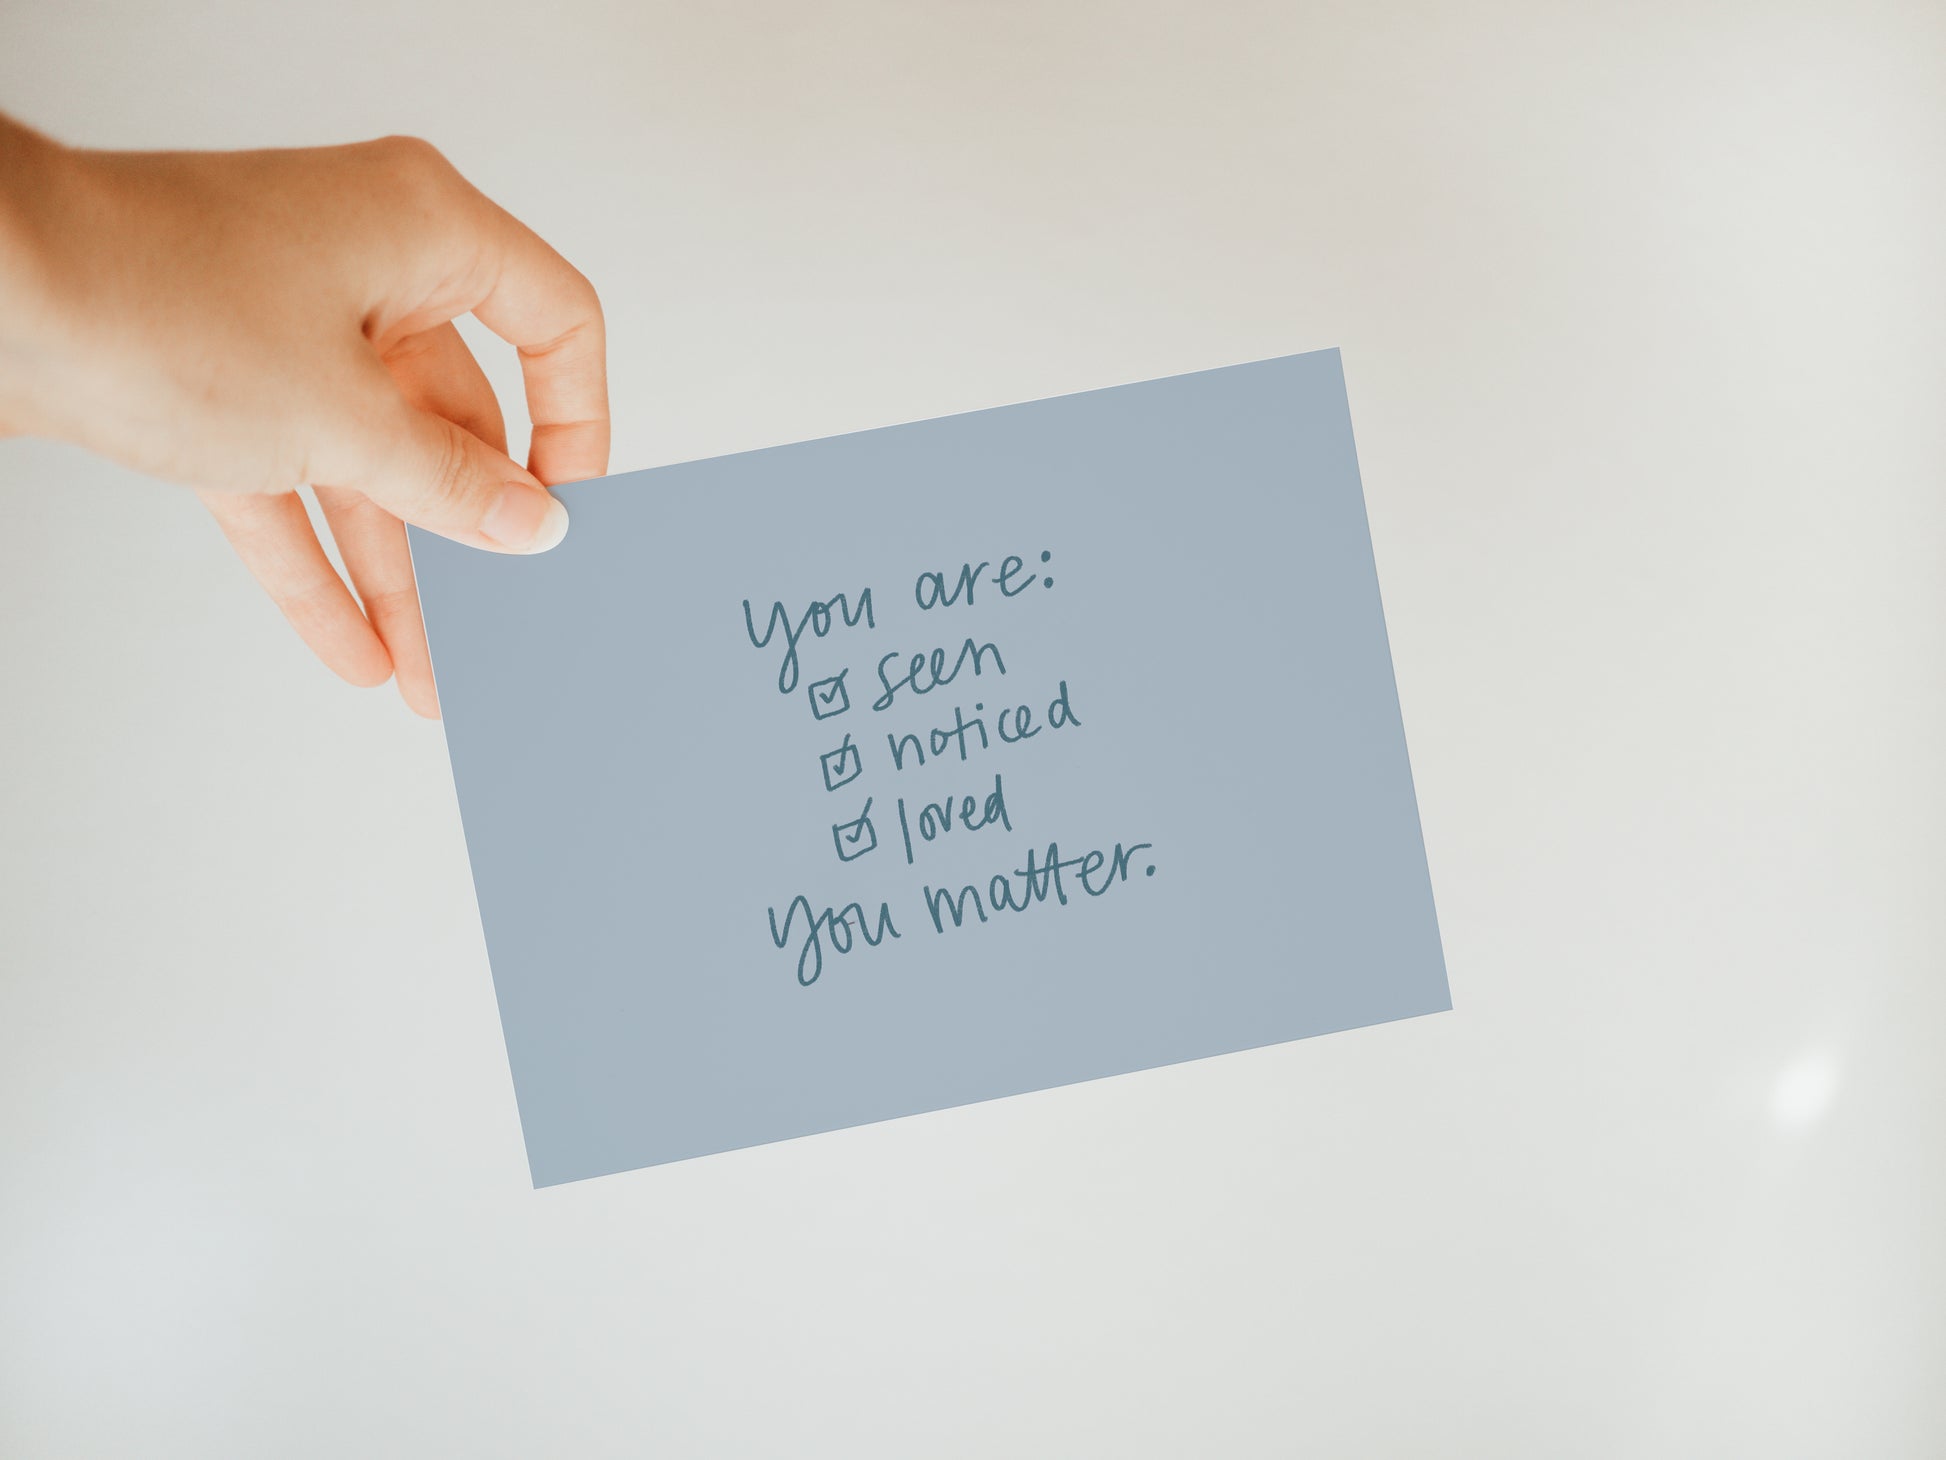 hand holding a dusky blue greeting card that has a checklist and says "you are: seen, noticed, loved, you matter."